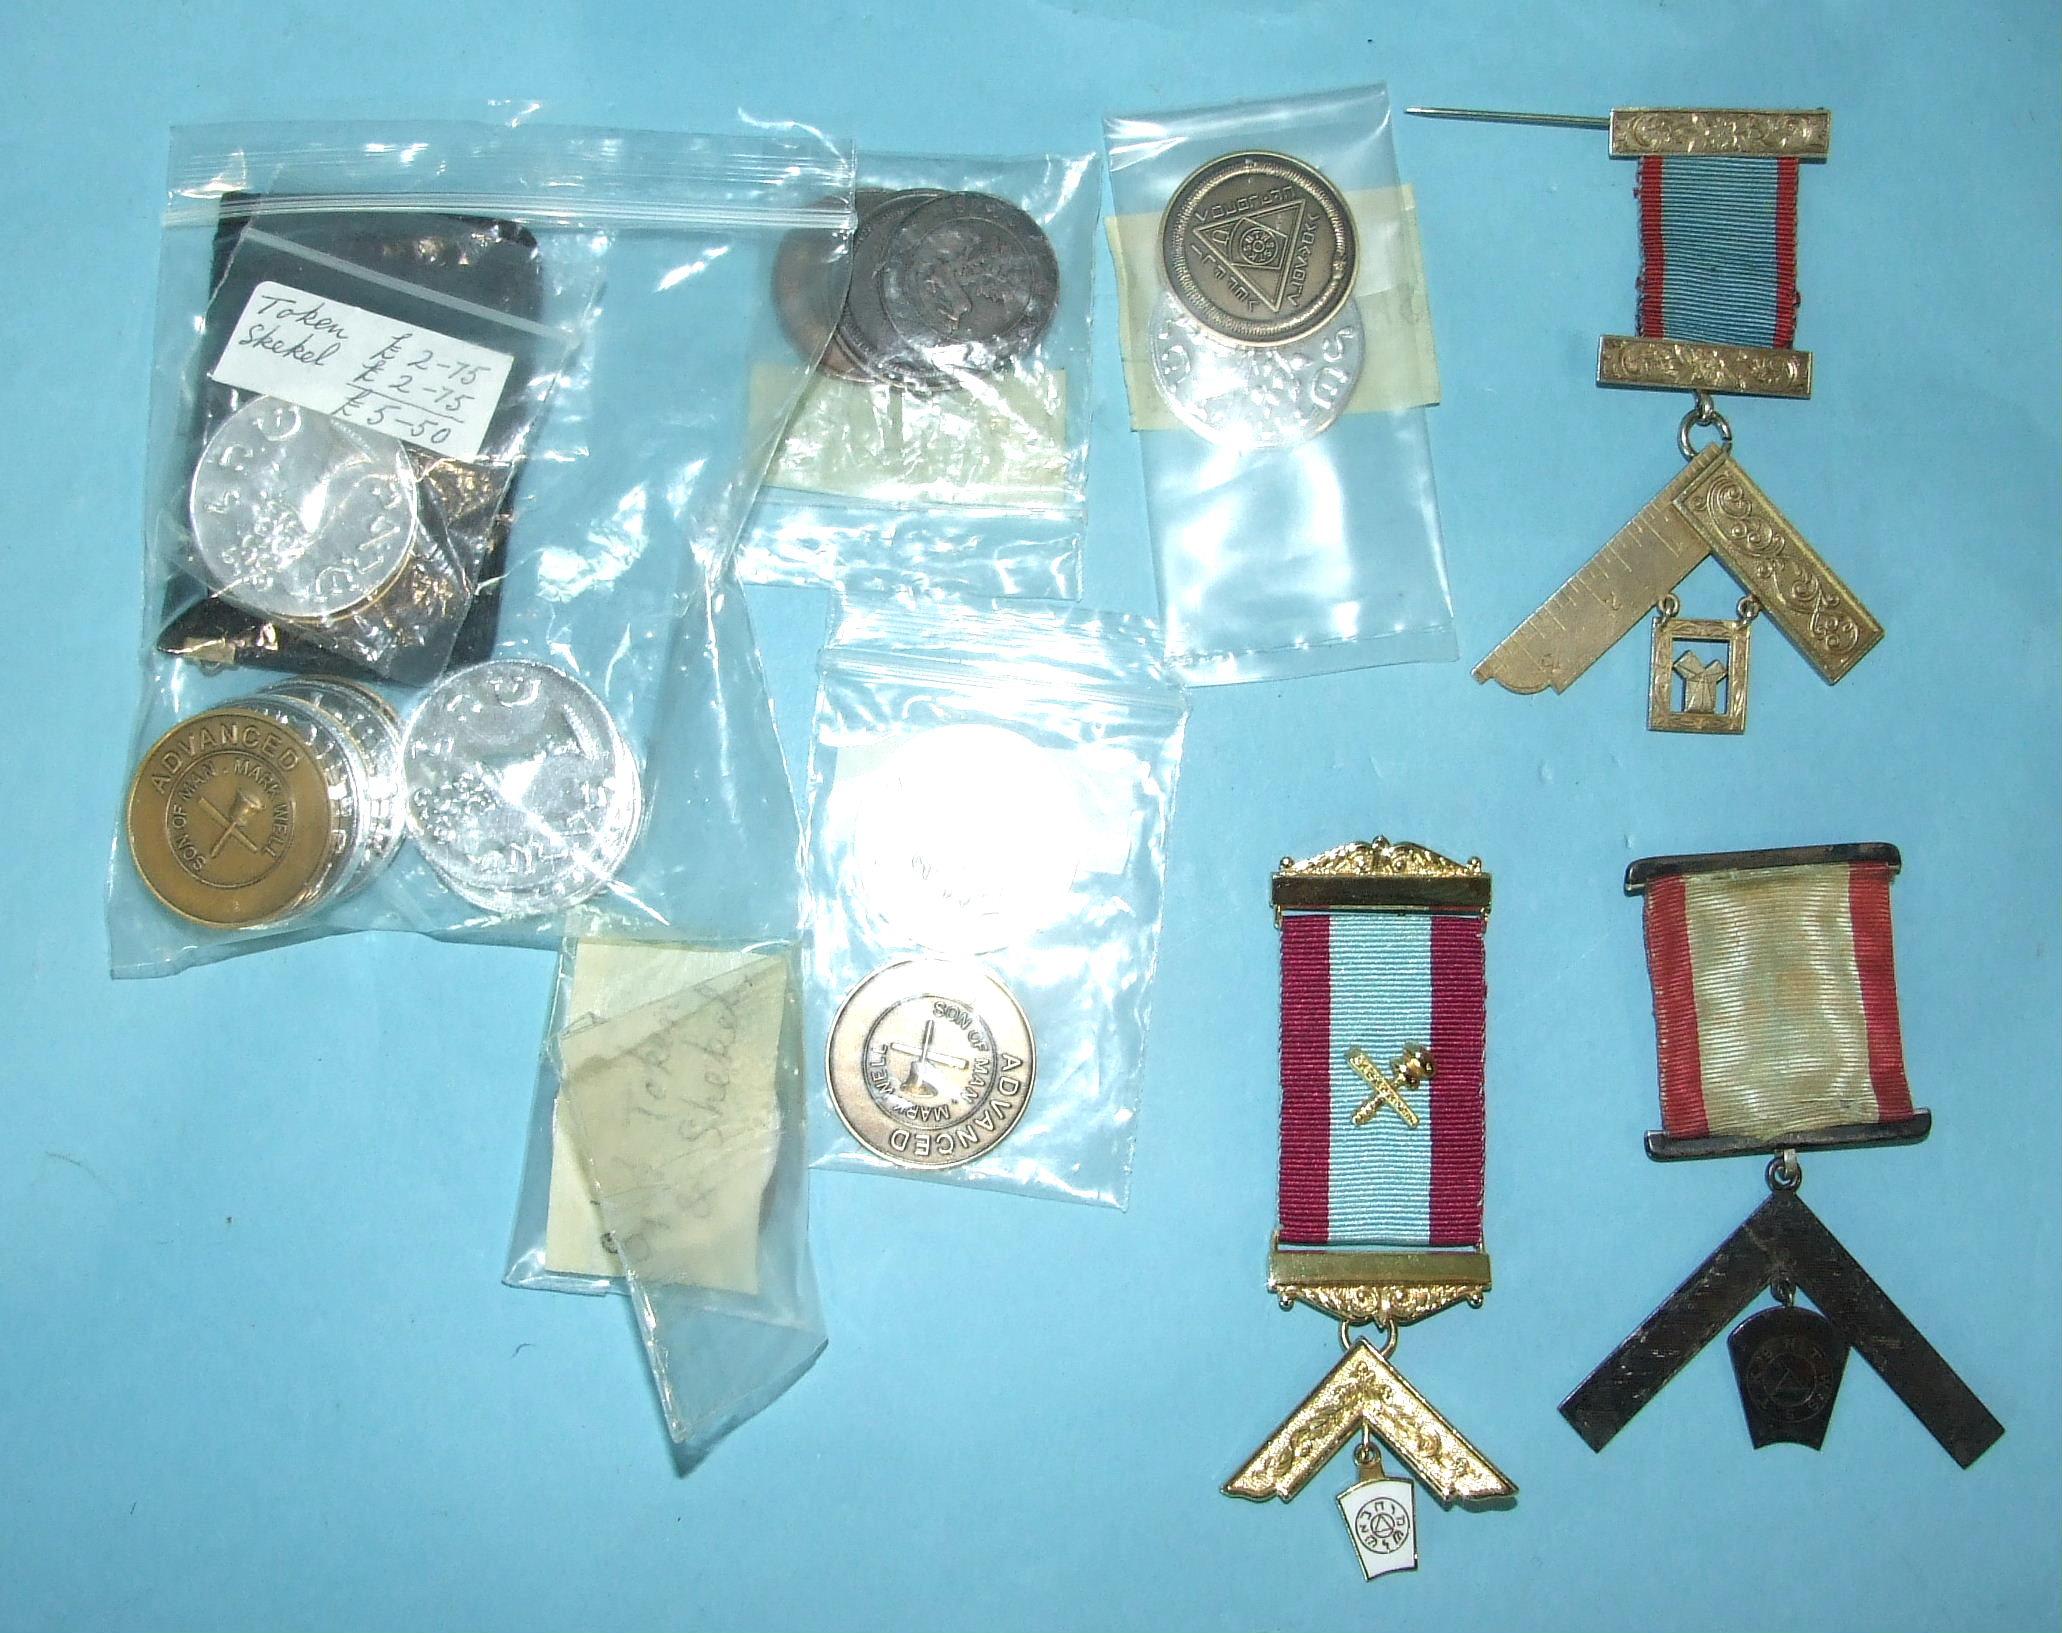 A collection of Mark Masonic tokens, an old Past Master's jewel, a new Past Master's jewel and a